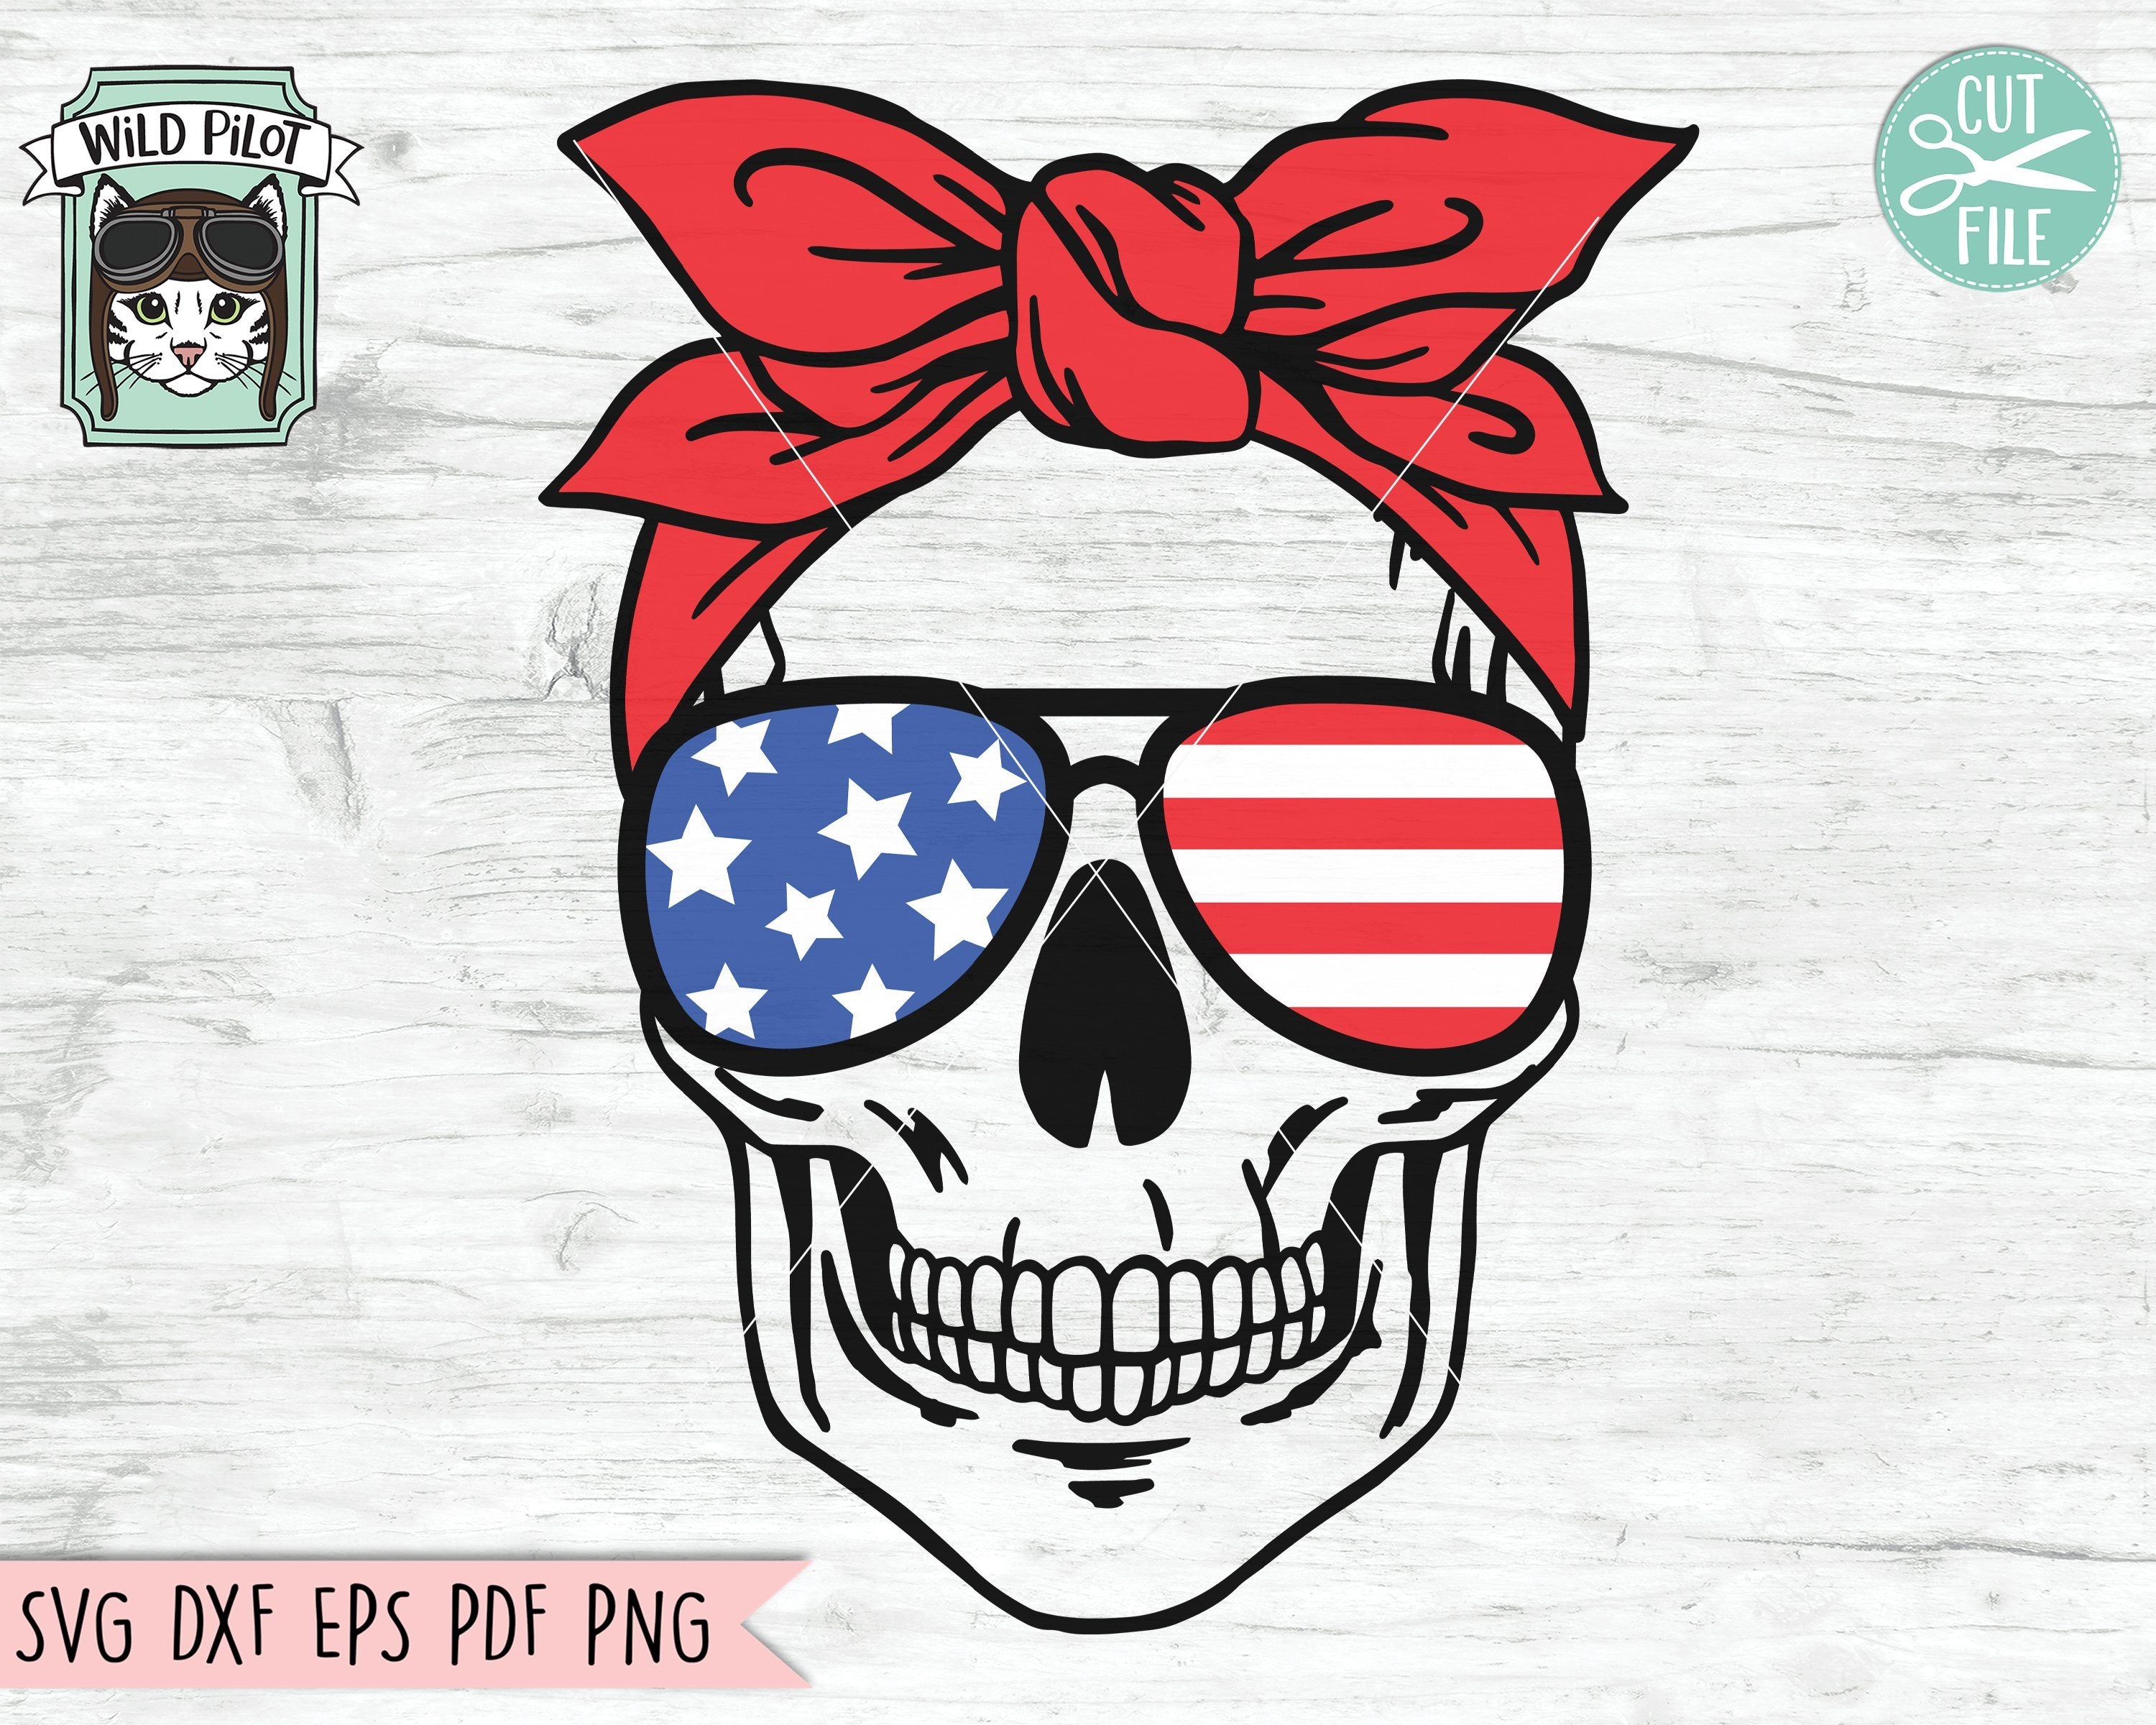 Download July 4th Skull Svg Fourth Of July Skull Svg File Skull Bandana Cut File Skull Glasses Svg Skull Cut File American Flag Sunglasses Svg So Fontsy